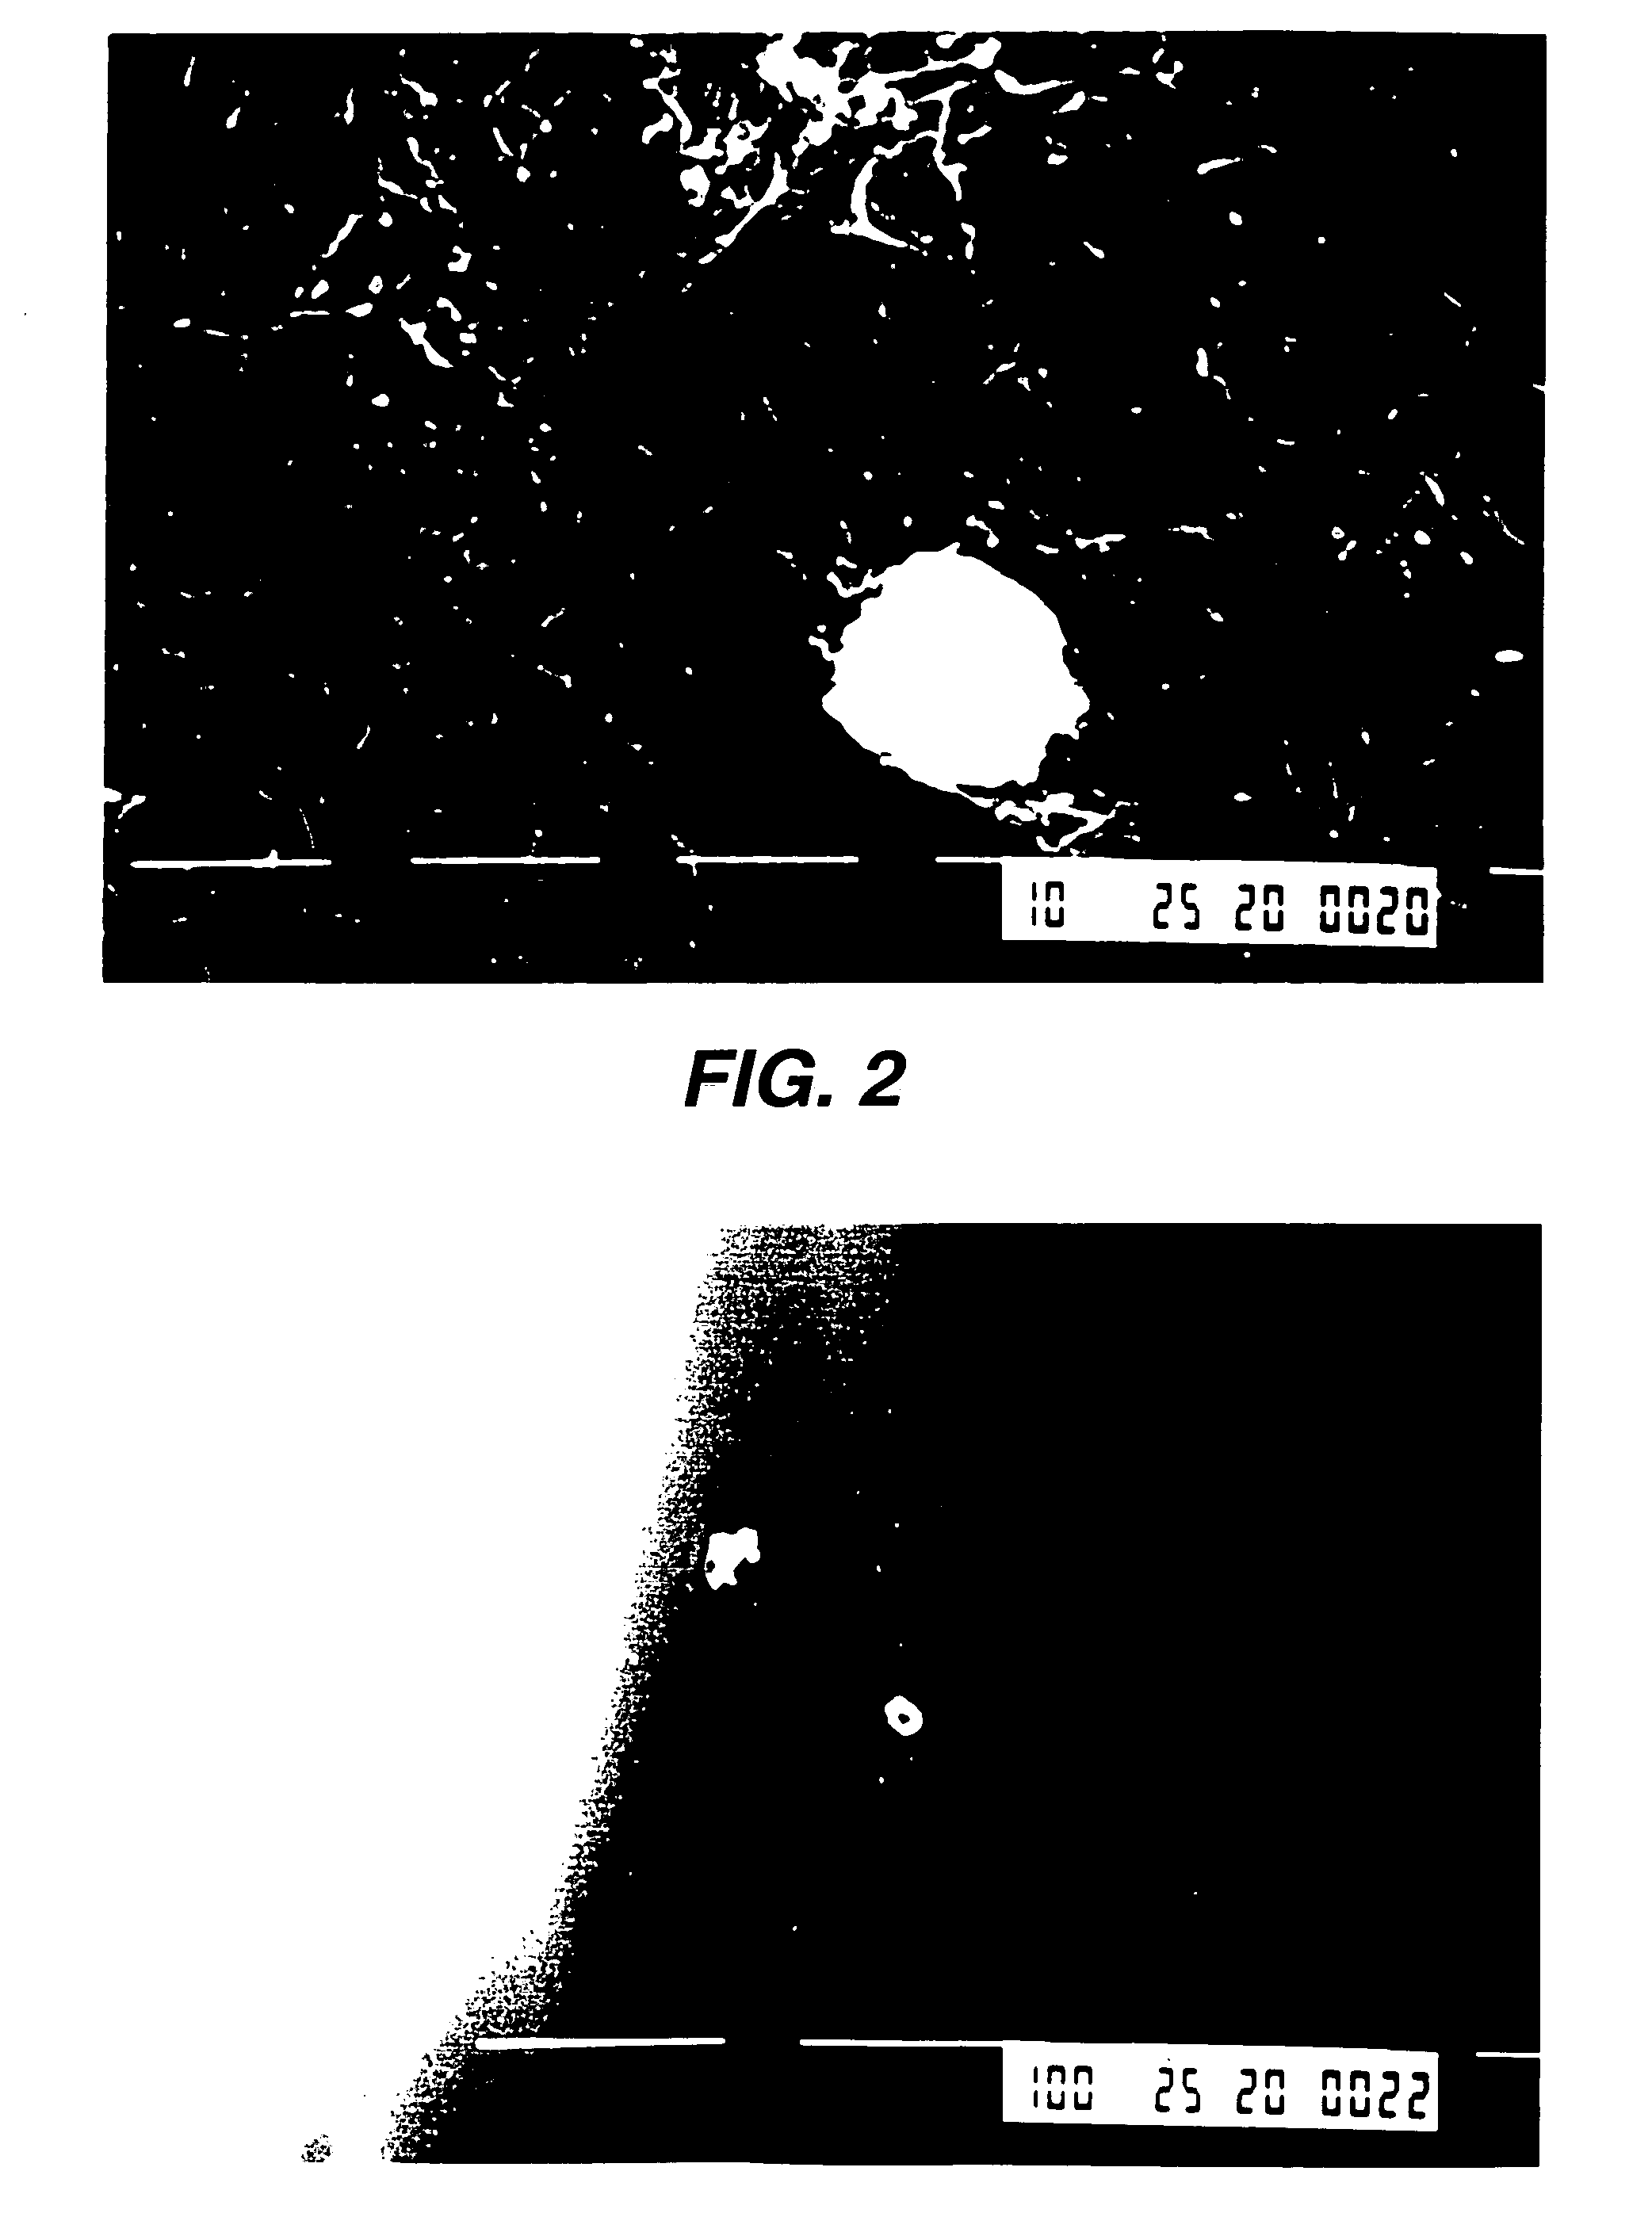 Cleaning composition and apparatus for removing biofilm and debris from lines and tubing and method therefor